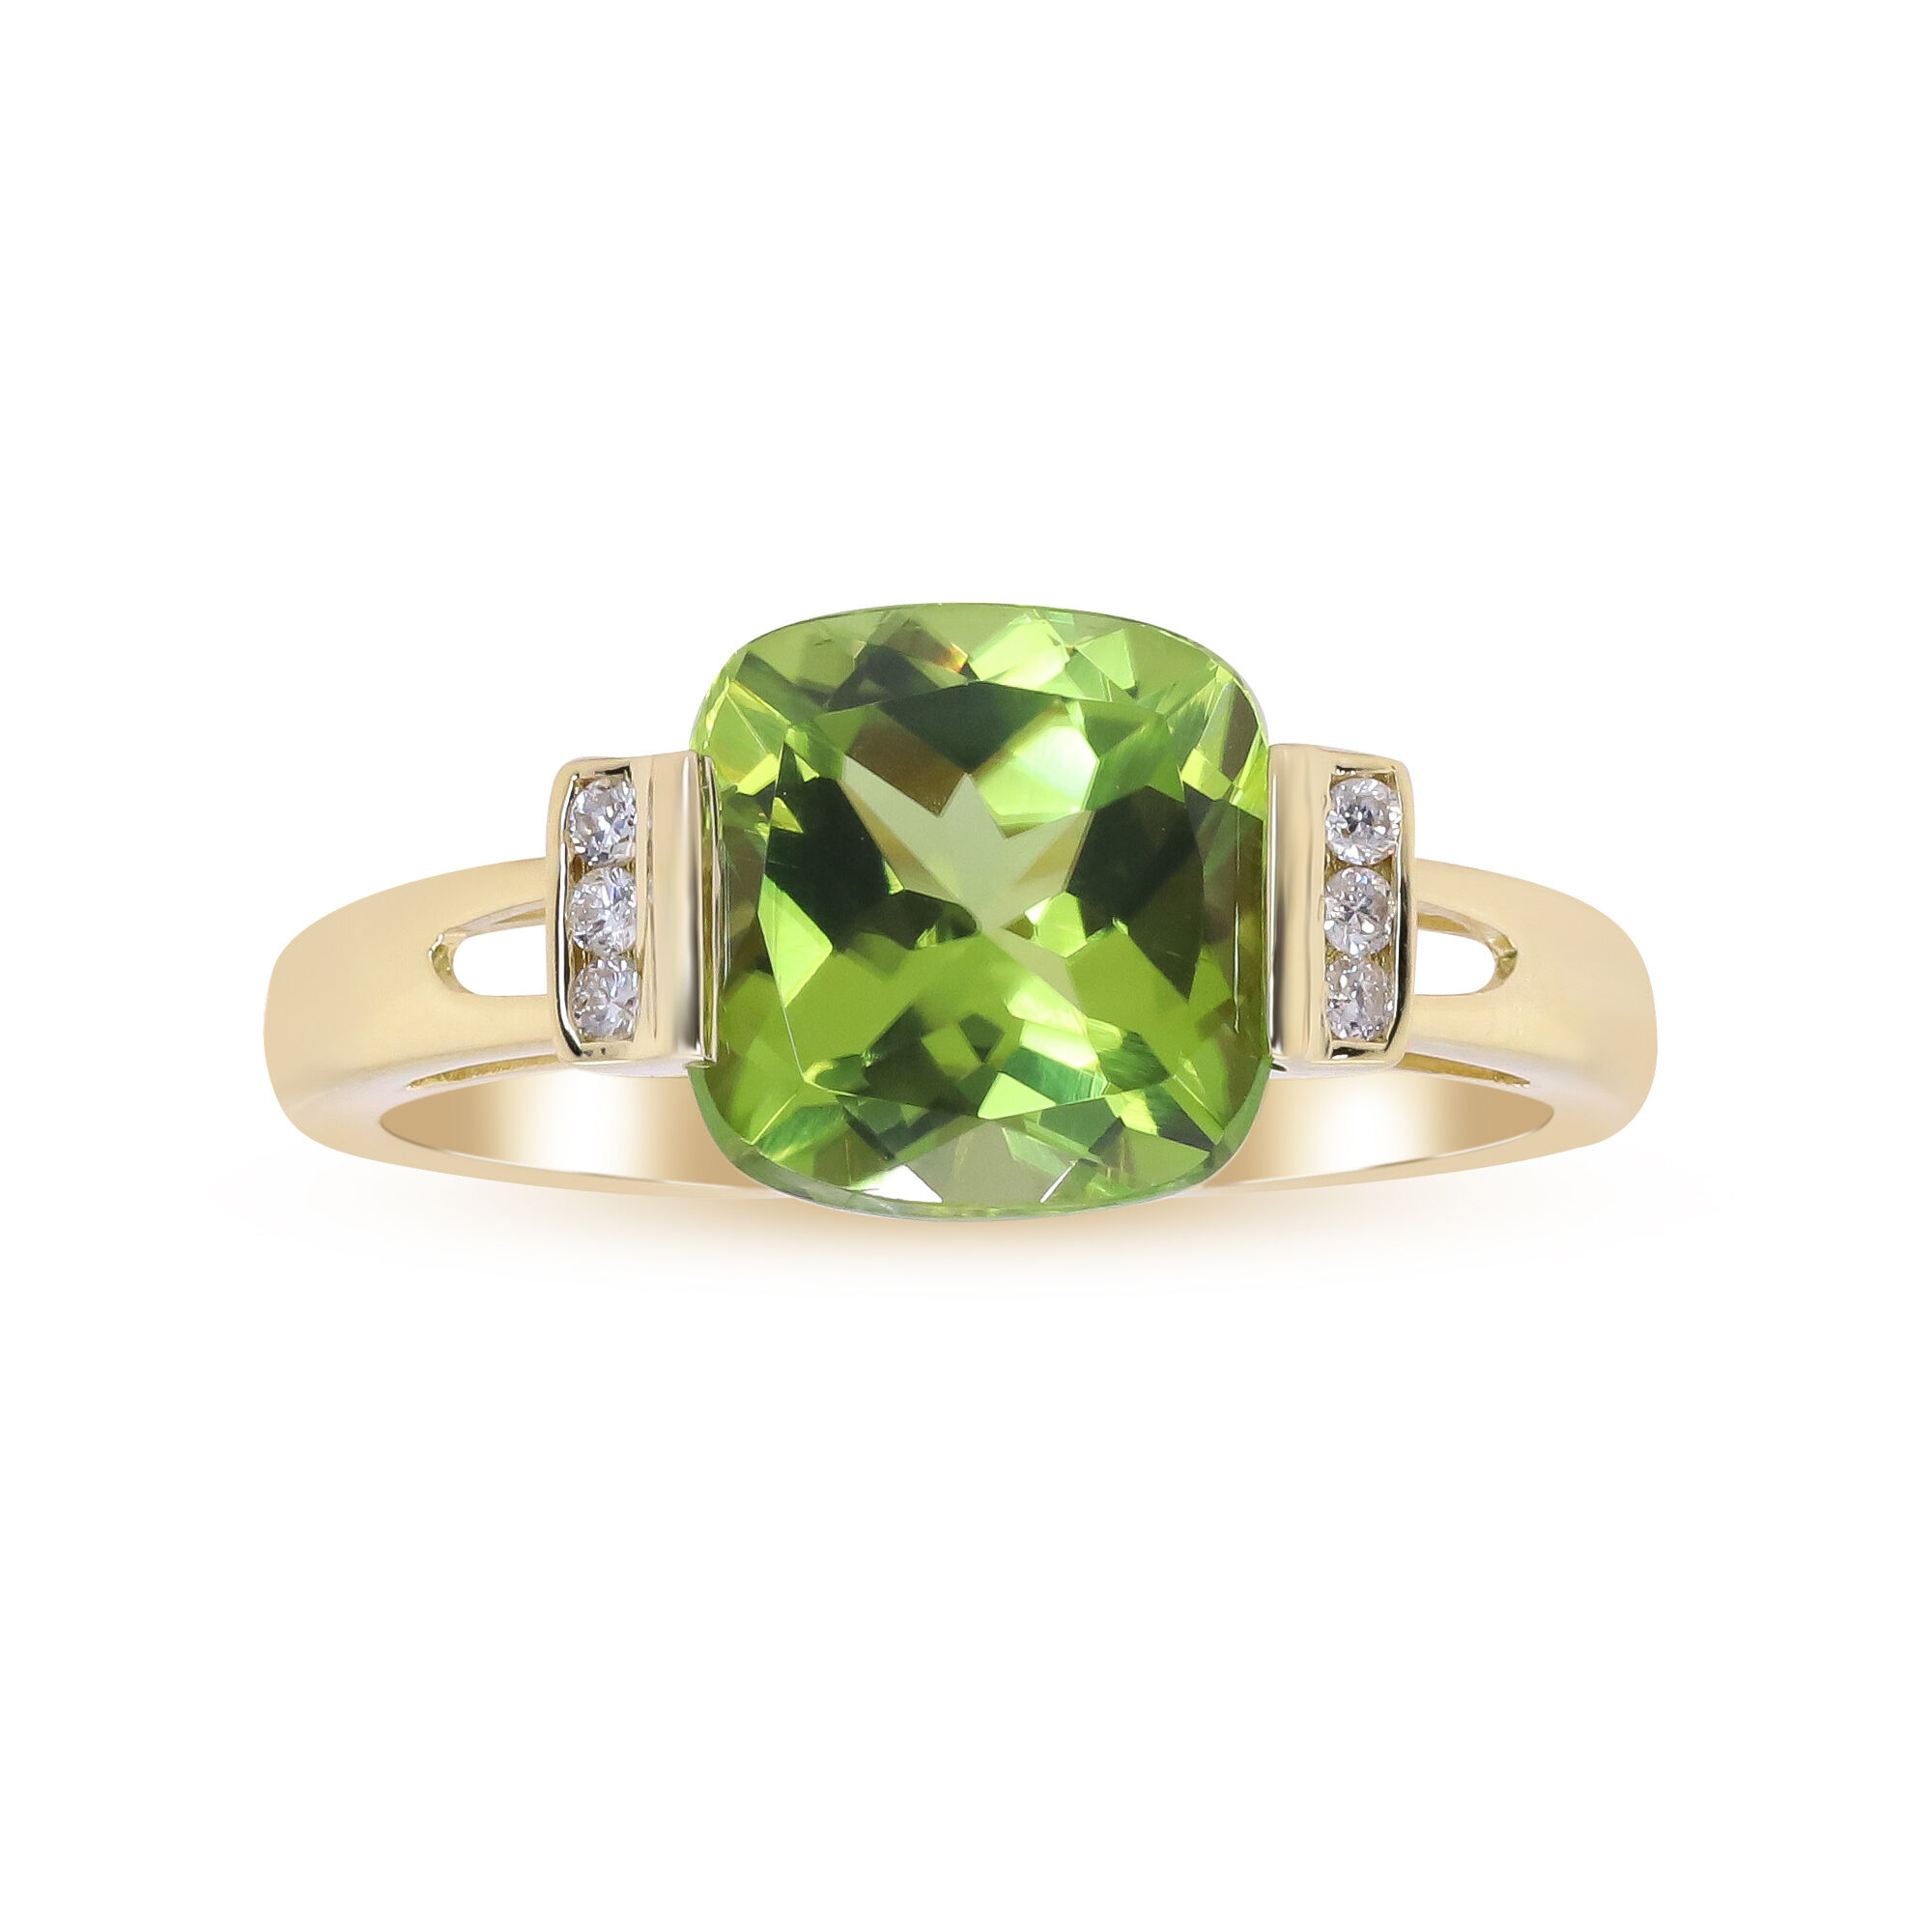 Buy Birth Stone Finger Ring(Peridot Stone) in India | Chungath Jewellery  Online- Rs. 23,390.00